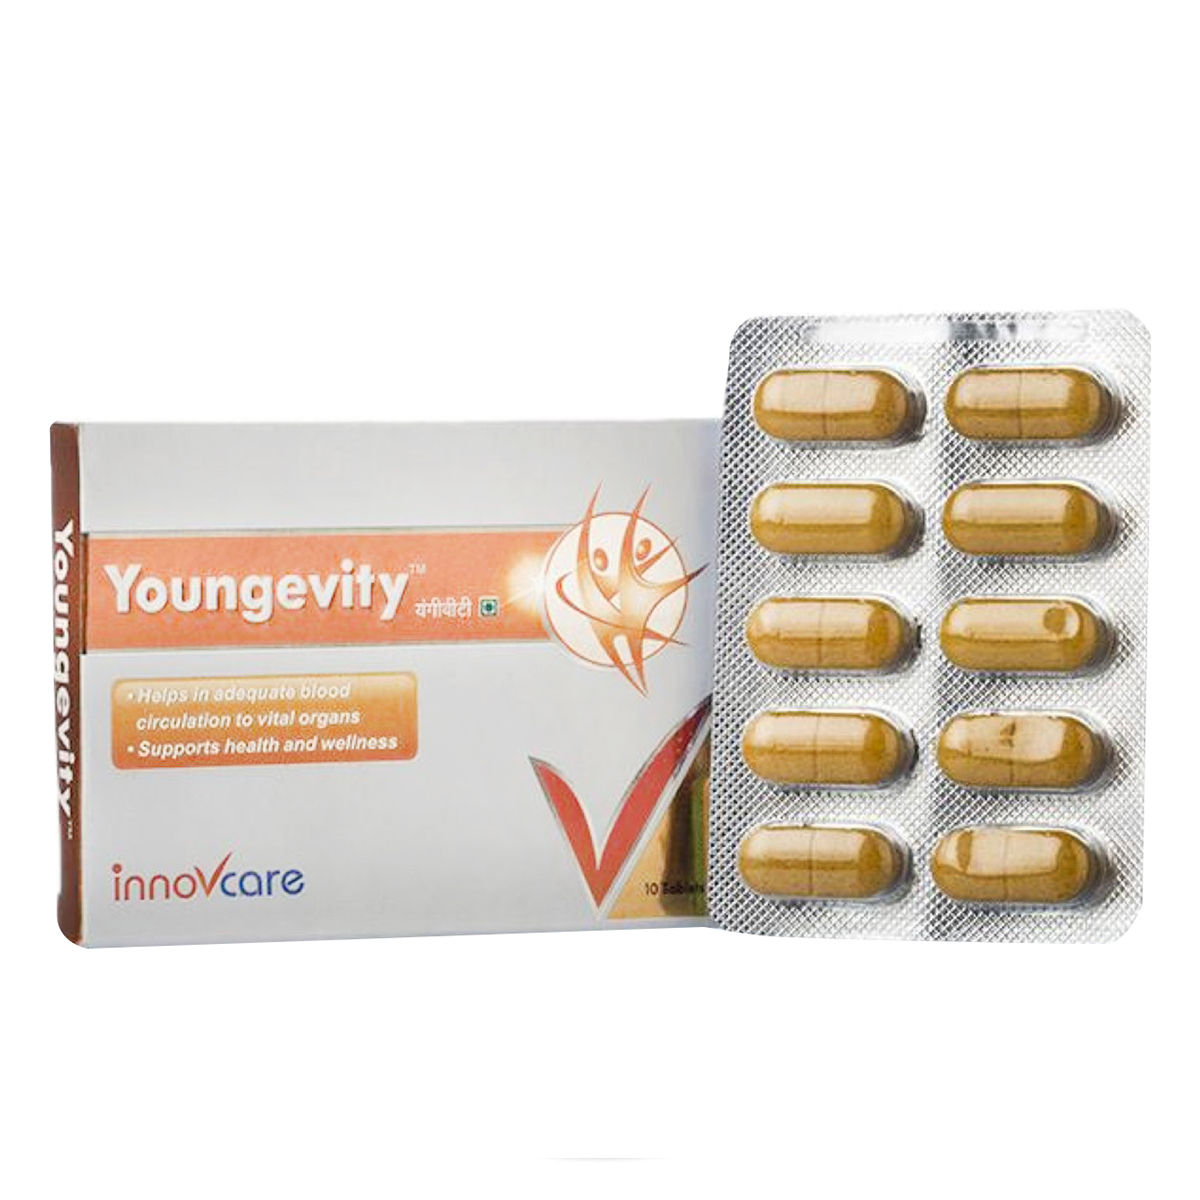 Buy Youngevity, 10 Tablets Online